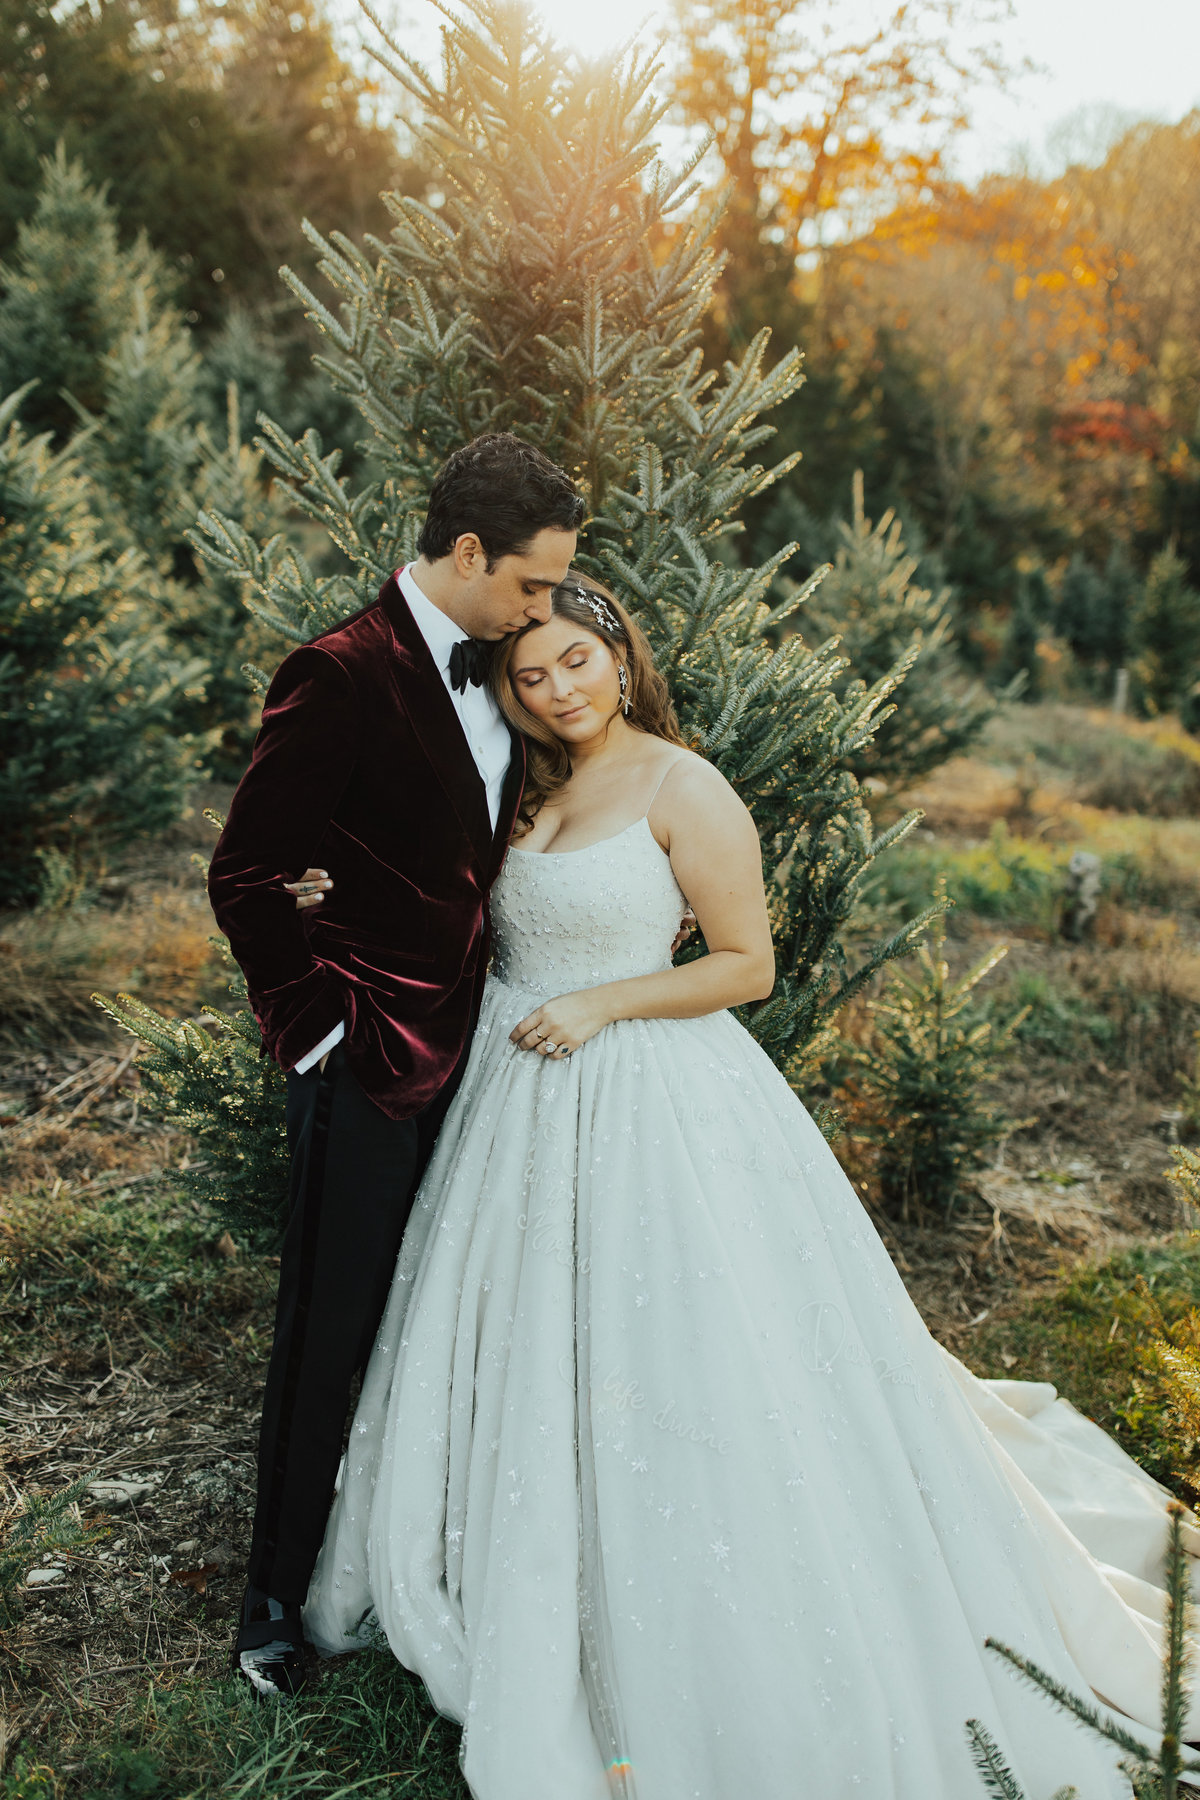 Christy-l-Johnston-Photography-Monica-Relyea-Events-Noelle-Downing-Instagram-Noelle_s-Favorite-Day-Wedding-Battenfelds-Christmas-tree-farm-Red-Hook-New-York-Hudson-Valley-upstate-november-2019-AP1A8001